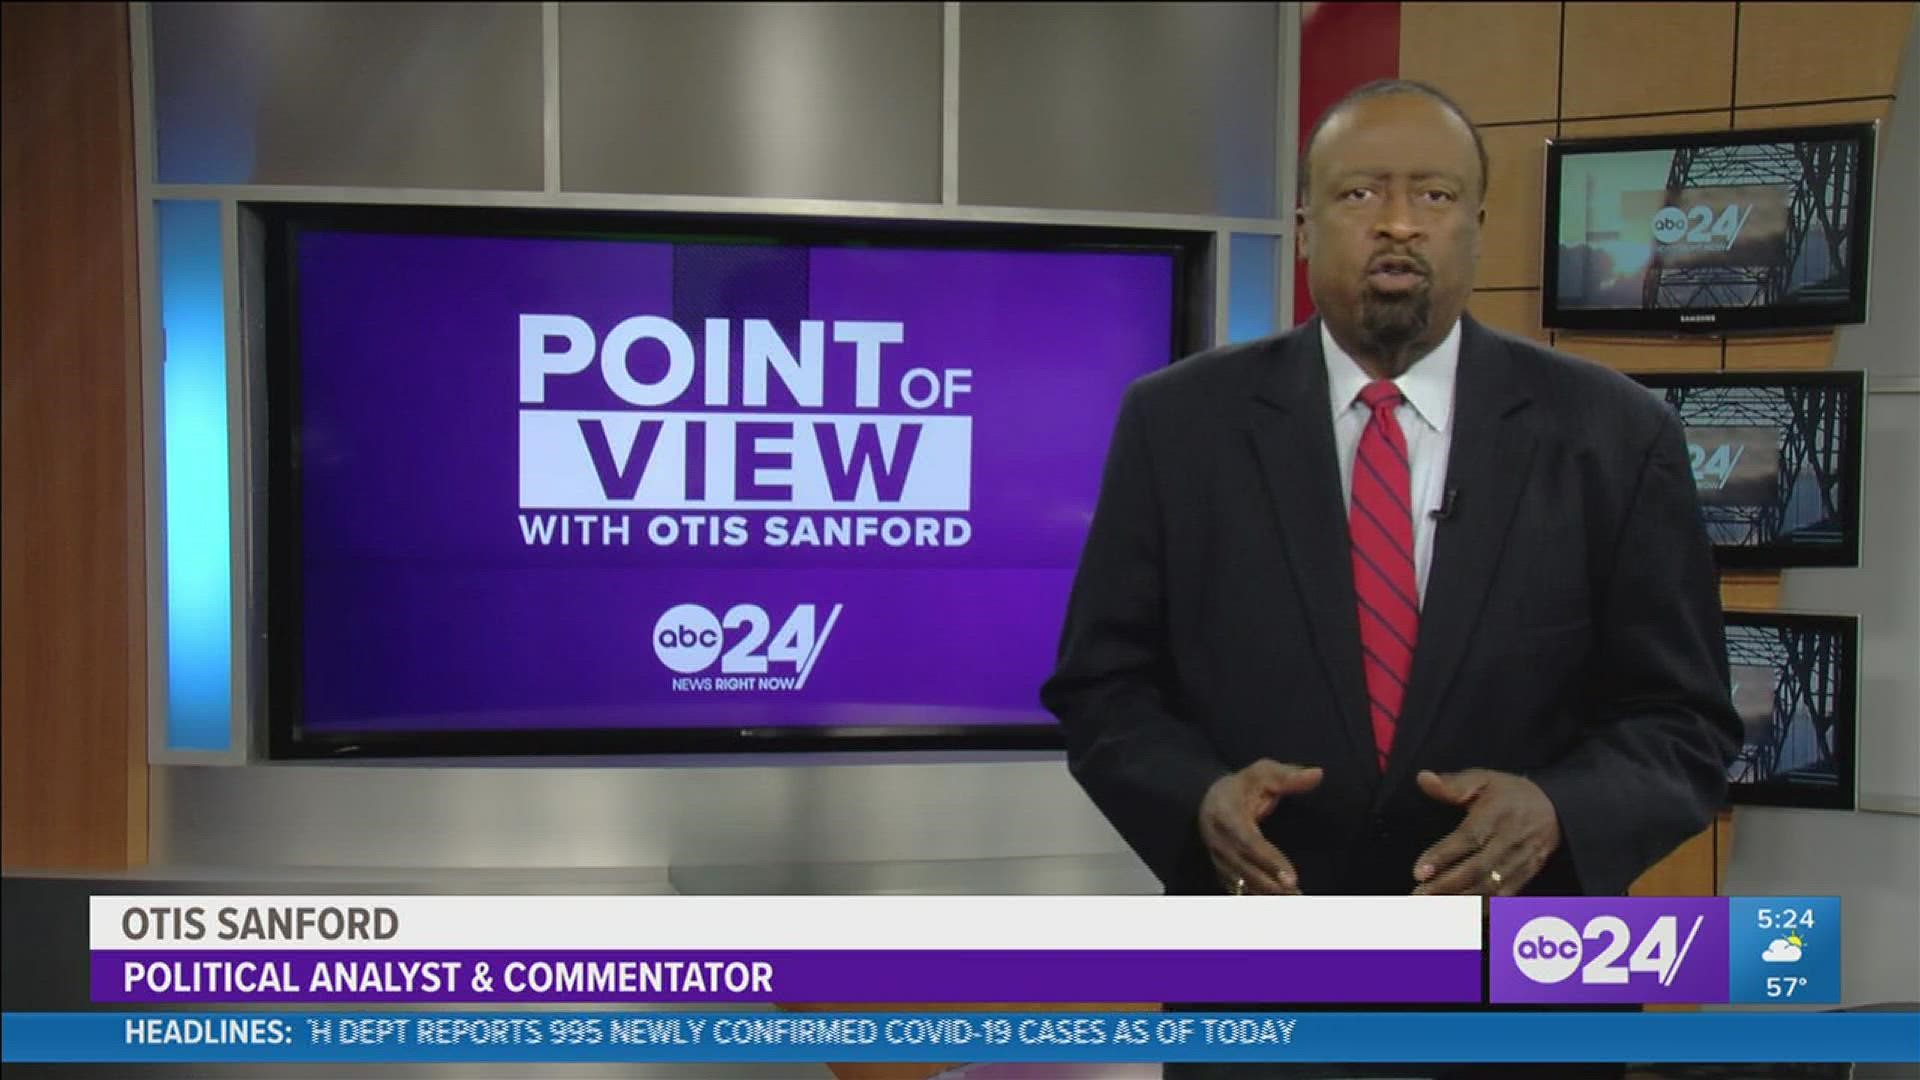 ABC24 Commentator and Political Analyst Otis Sanford discusses in his Point of View about the rising violence towards law enforcement.